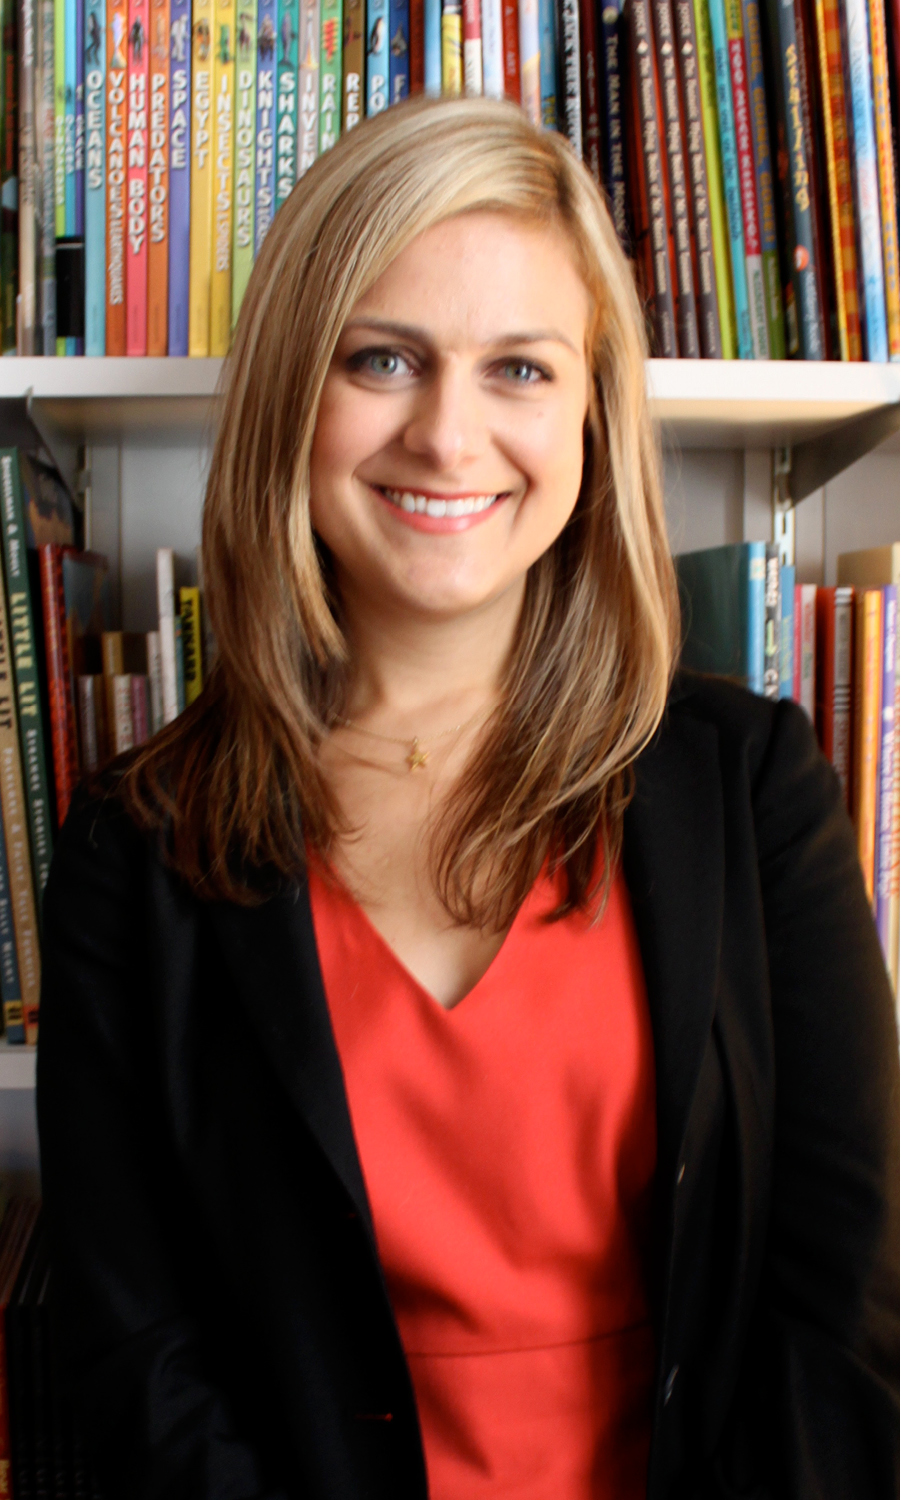 Kristin Ostby, Editor, Simon & Schuster Books for Young Readers